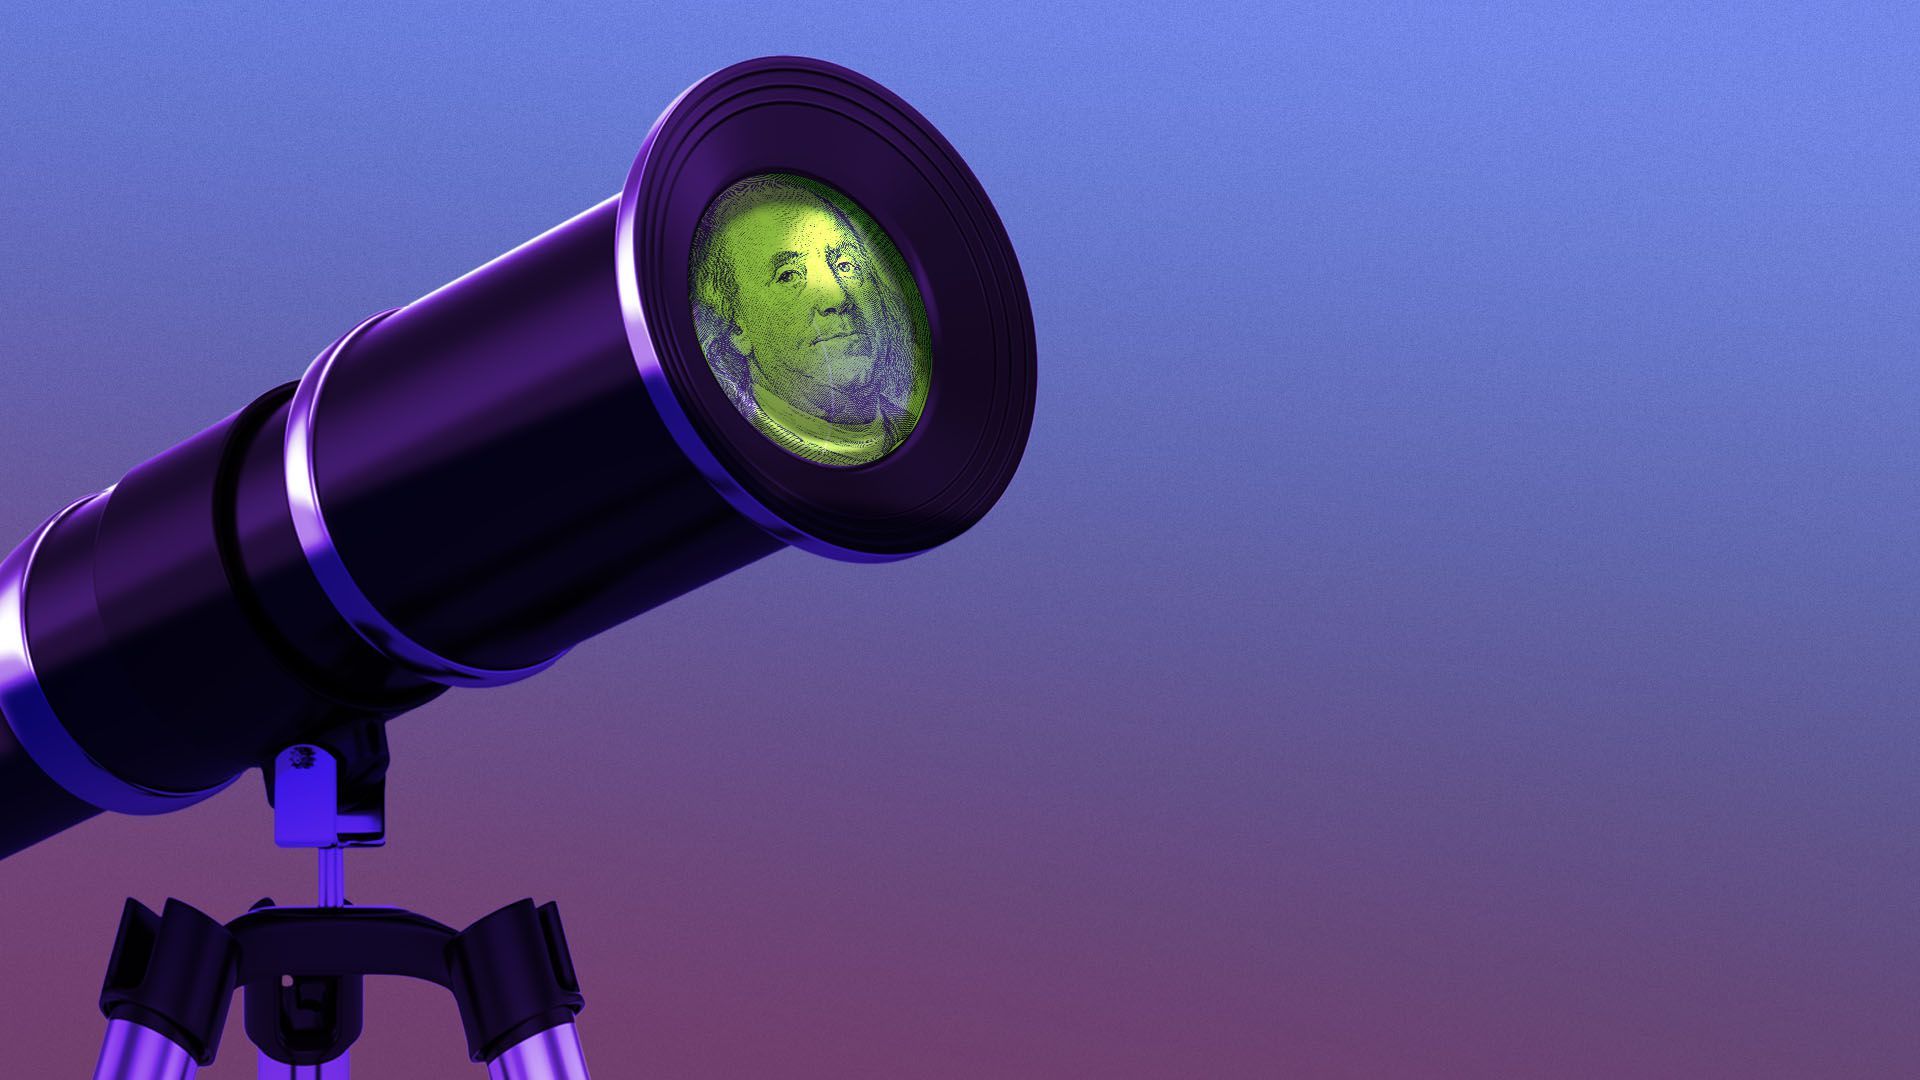 Illustration of a telescope focused on an image of Benjamin Franklin from a hundred dollar bill